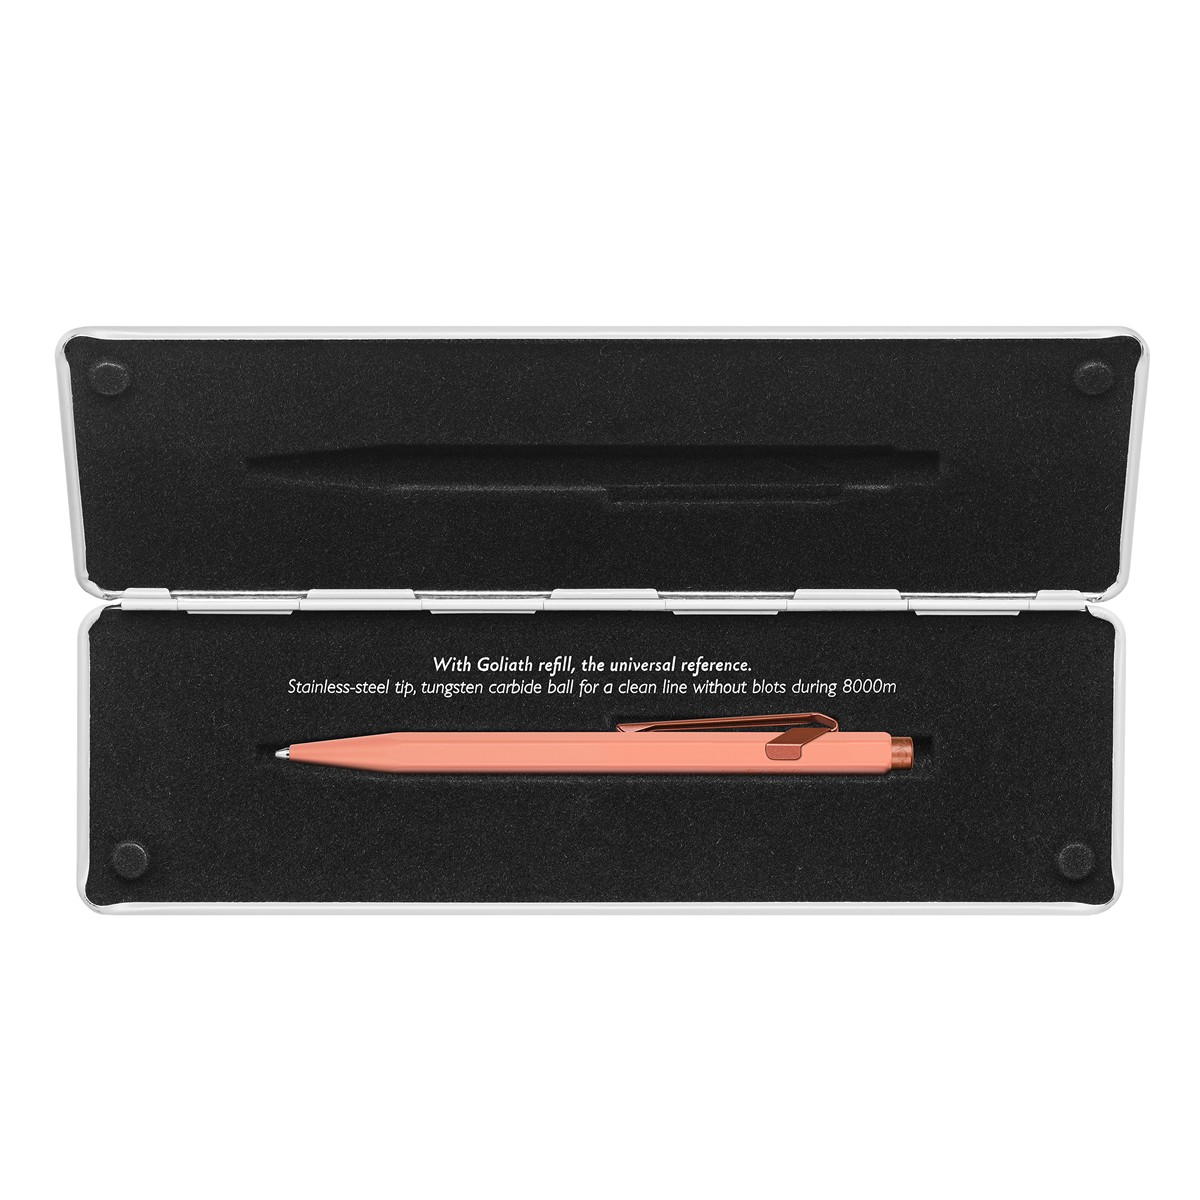 Caran d'Ache CLAIM YOUR STYLE 3 Στυλό Διαρκείας Limited Edition - Tangerine